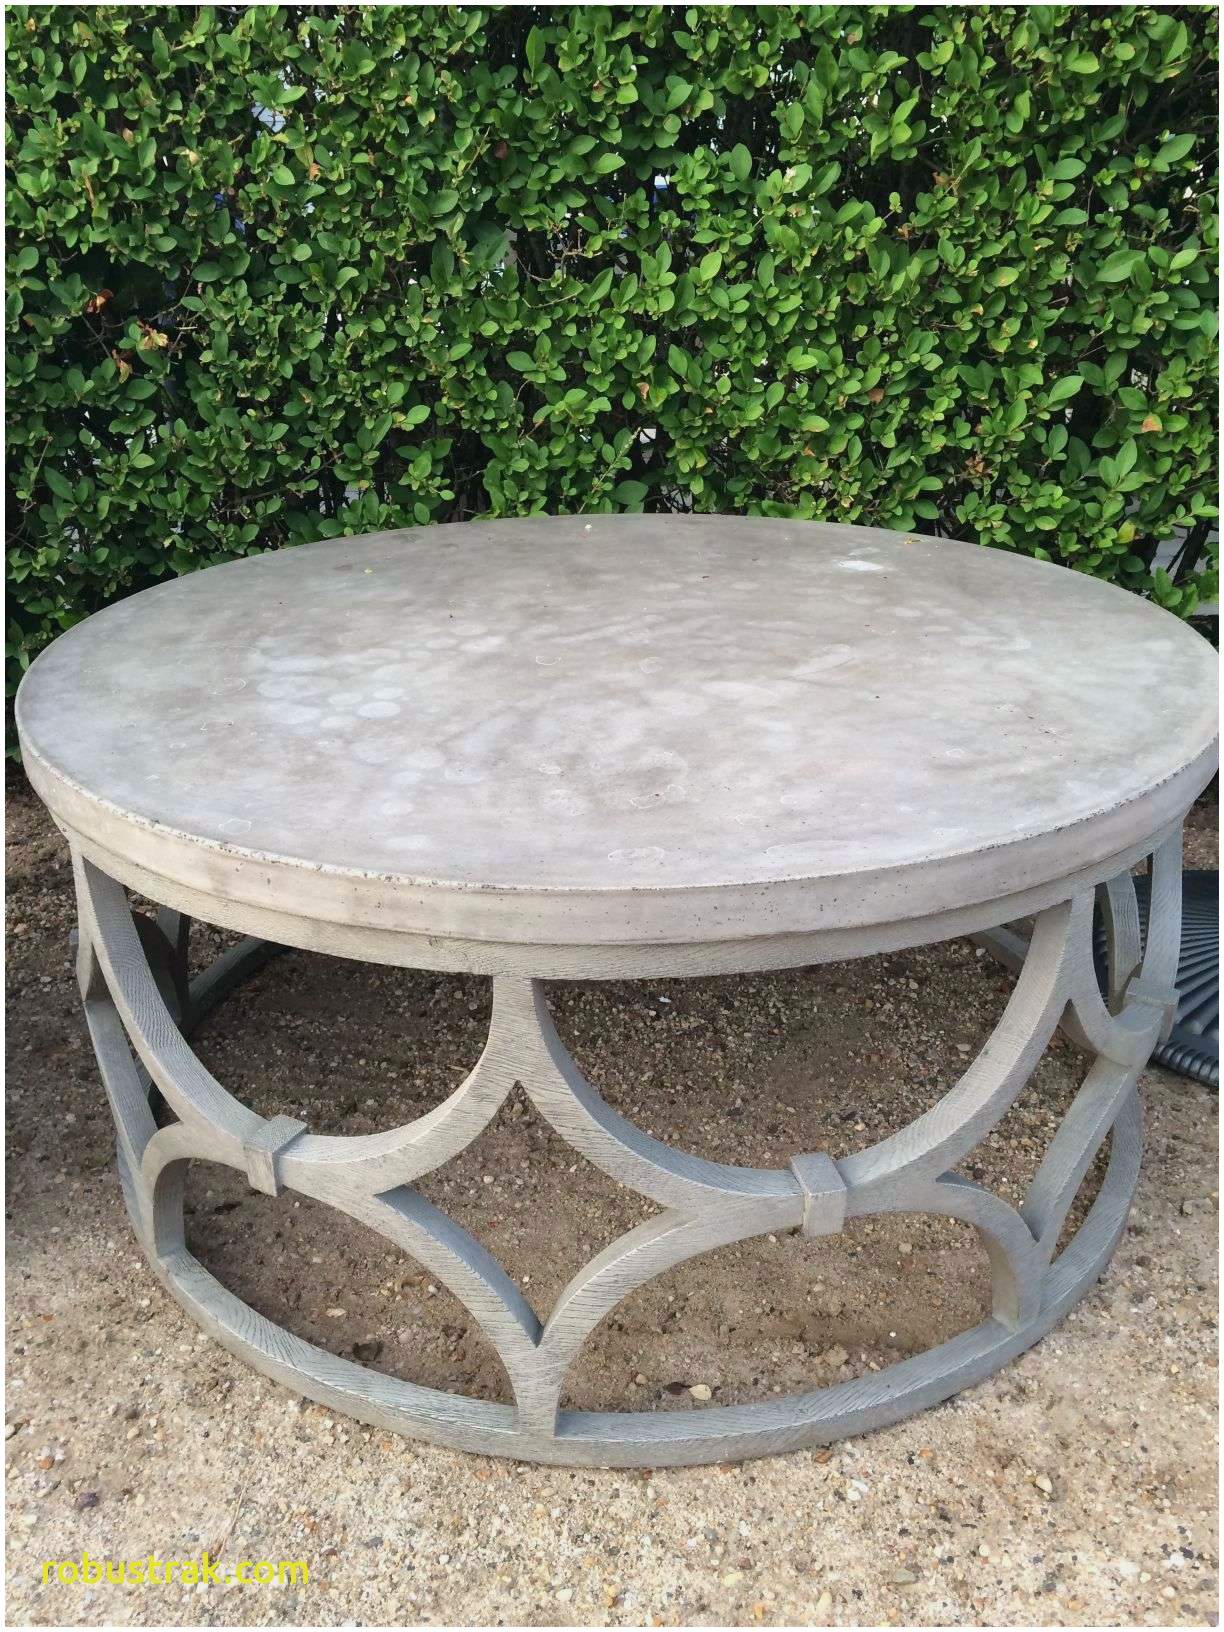 alternative side table decor design independentinnovation rowan small outdoor coffee concrete round mecox gardens ideas plastic end tables awesome elegant for best white garden